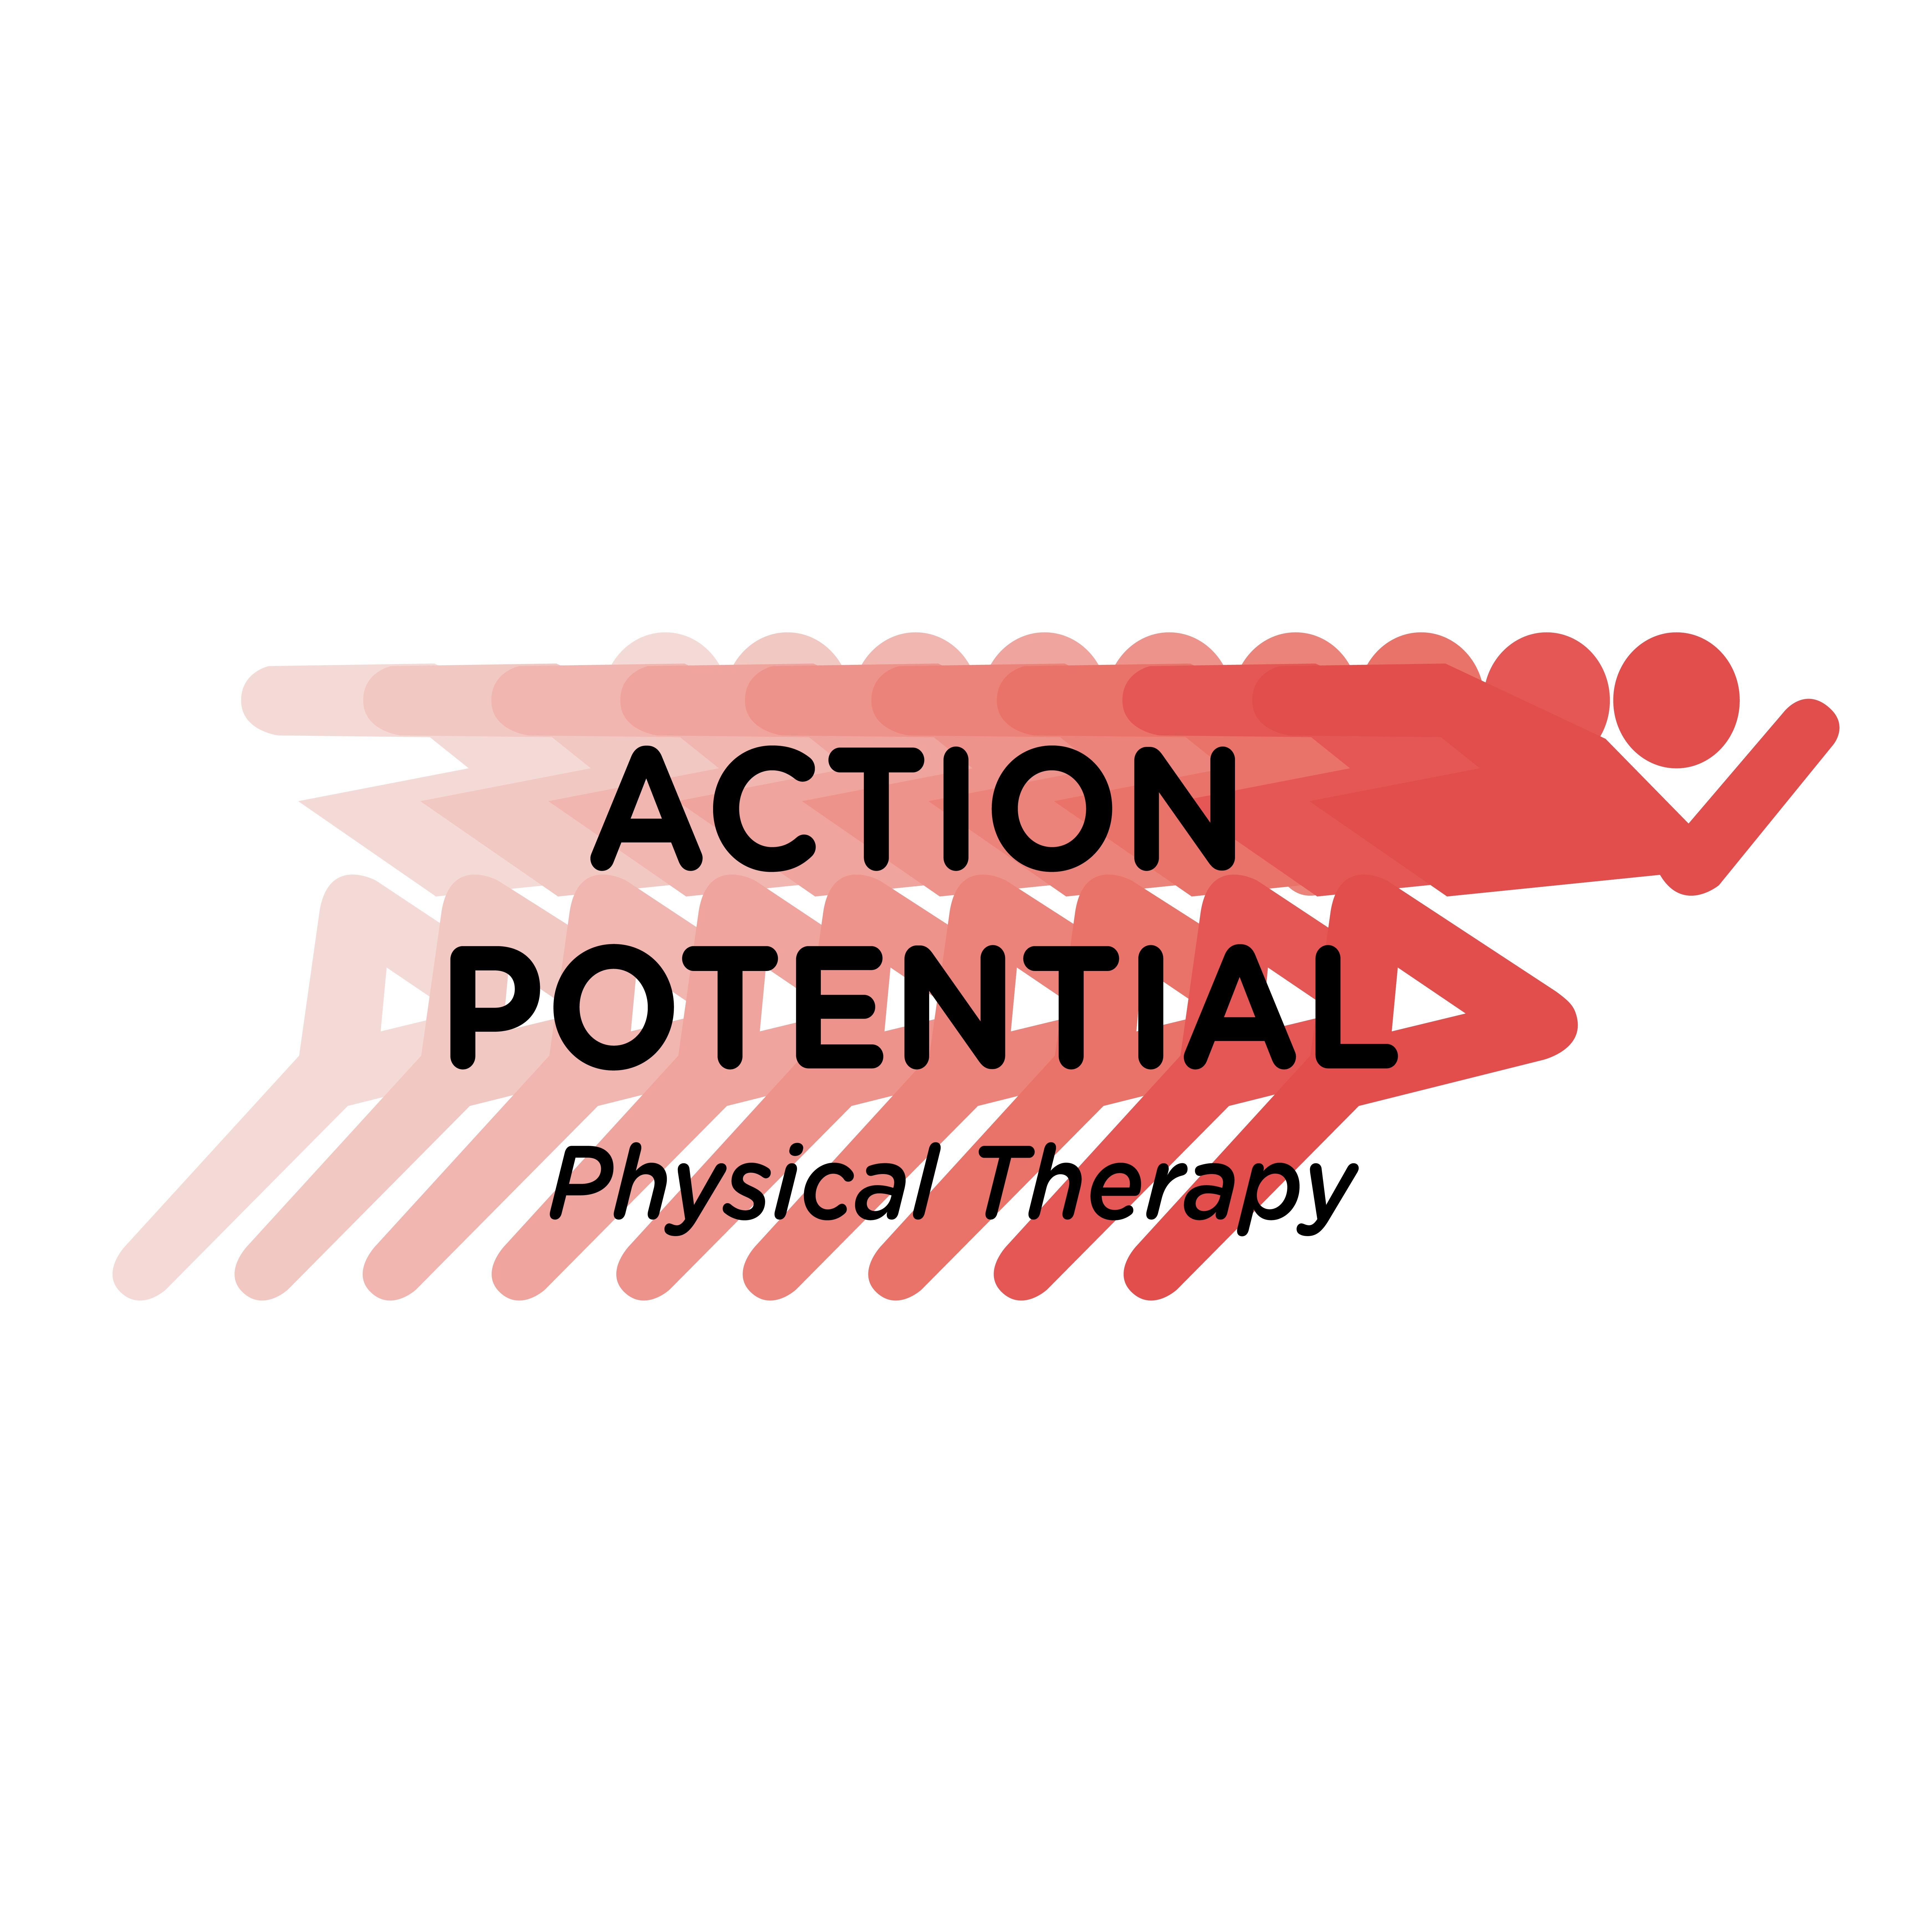 Action Potential Physical Therapy - Colorado Springs, Professional Pl.